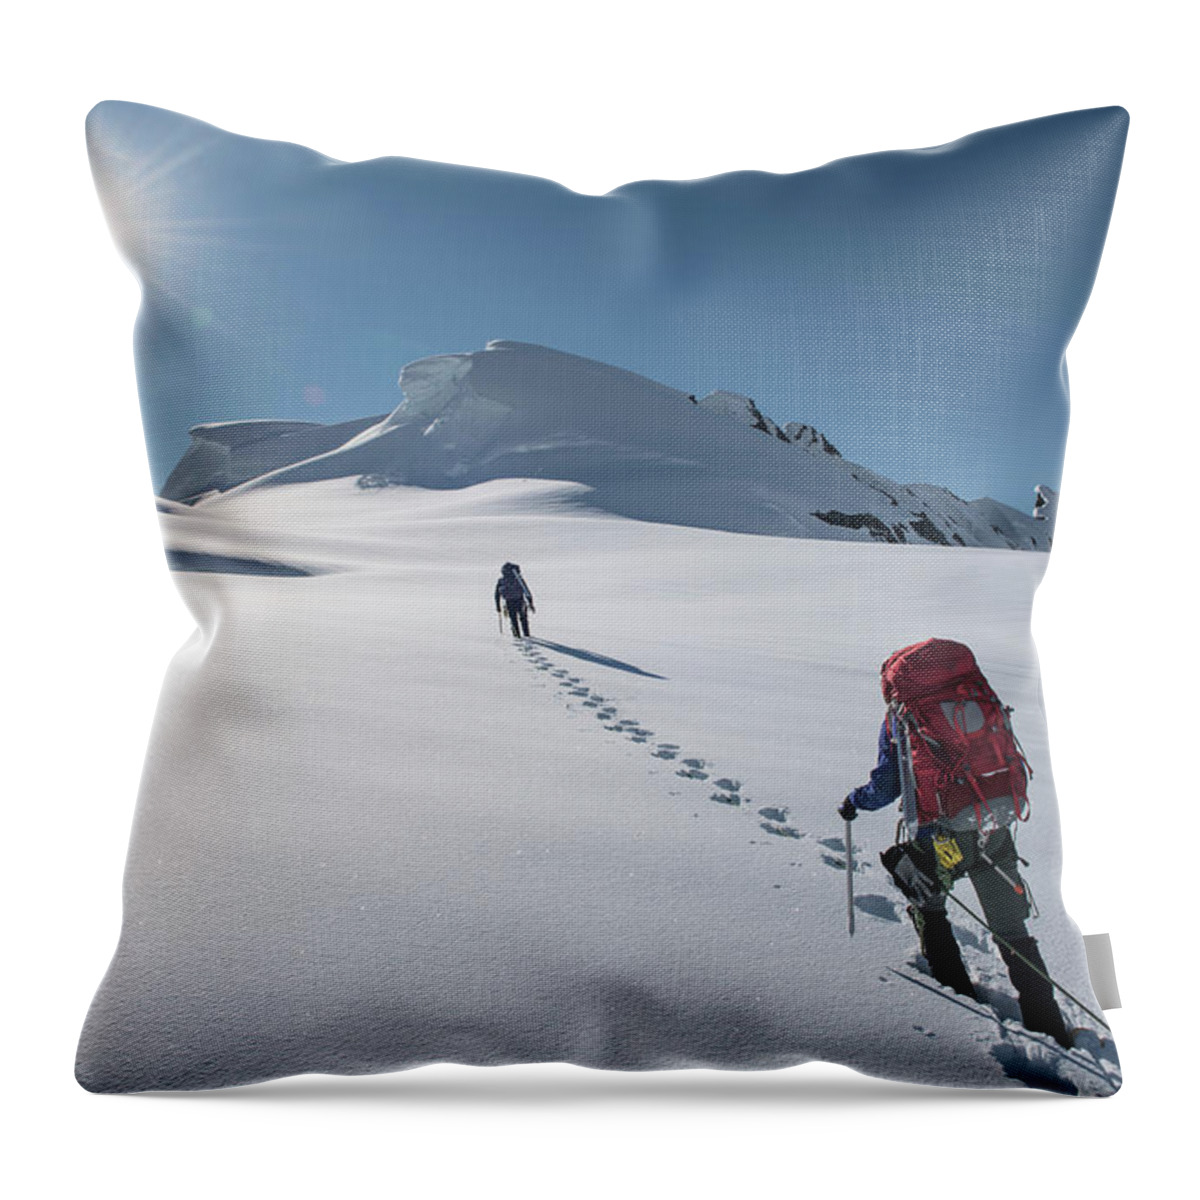 Women Throw Pillow featuring the photograph Climbers Nearing The Summit by Alasdair Turner